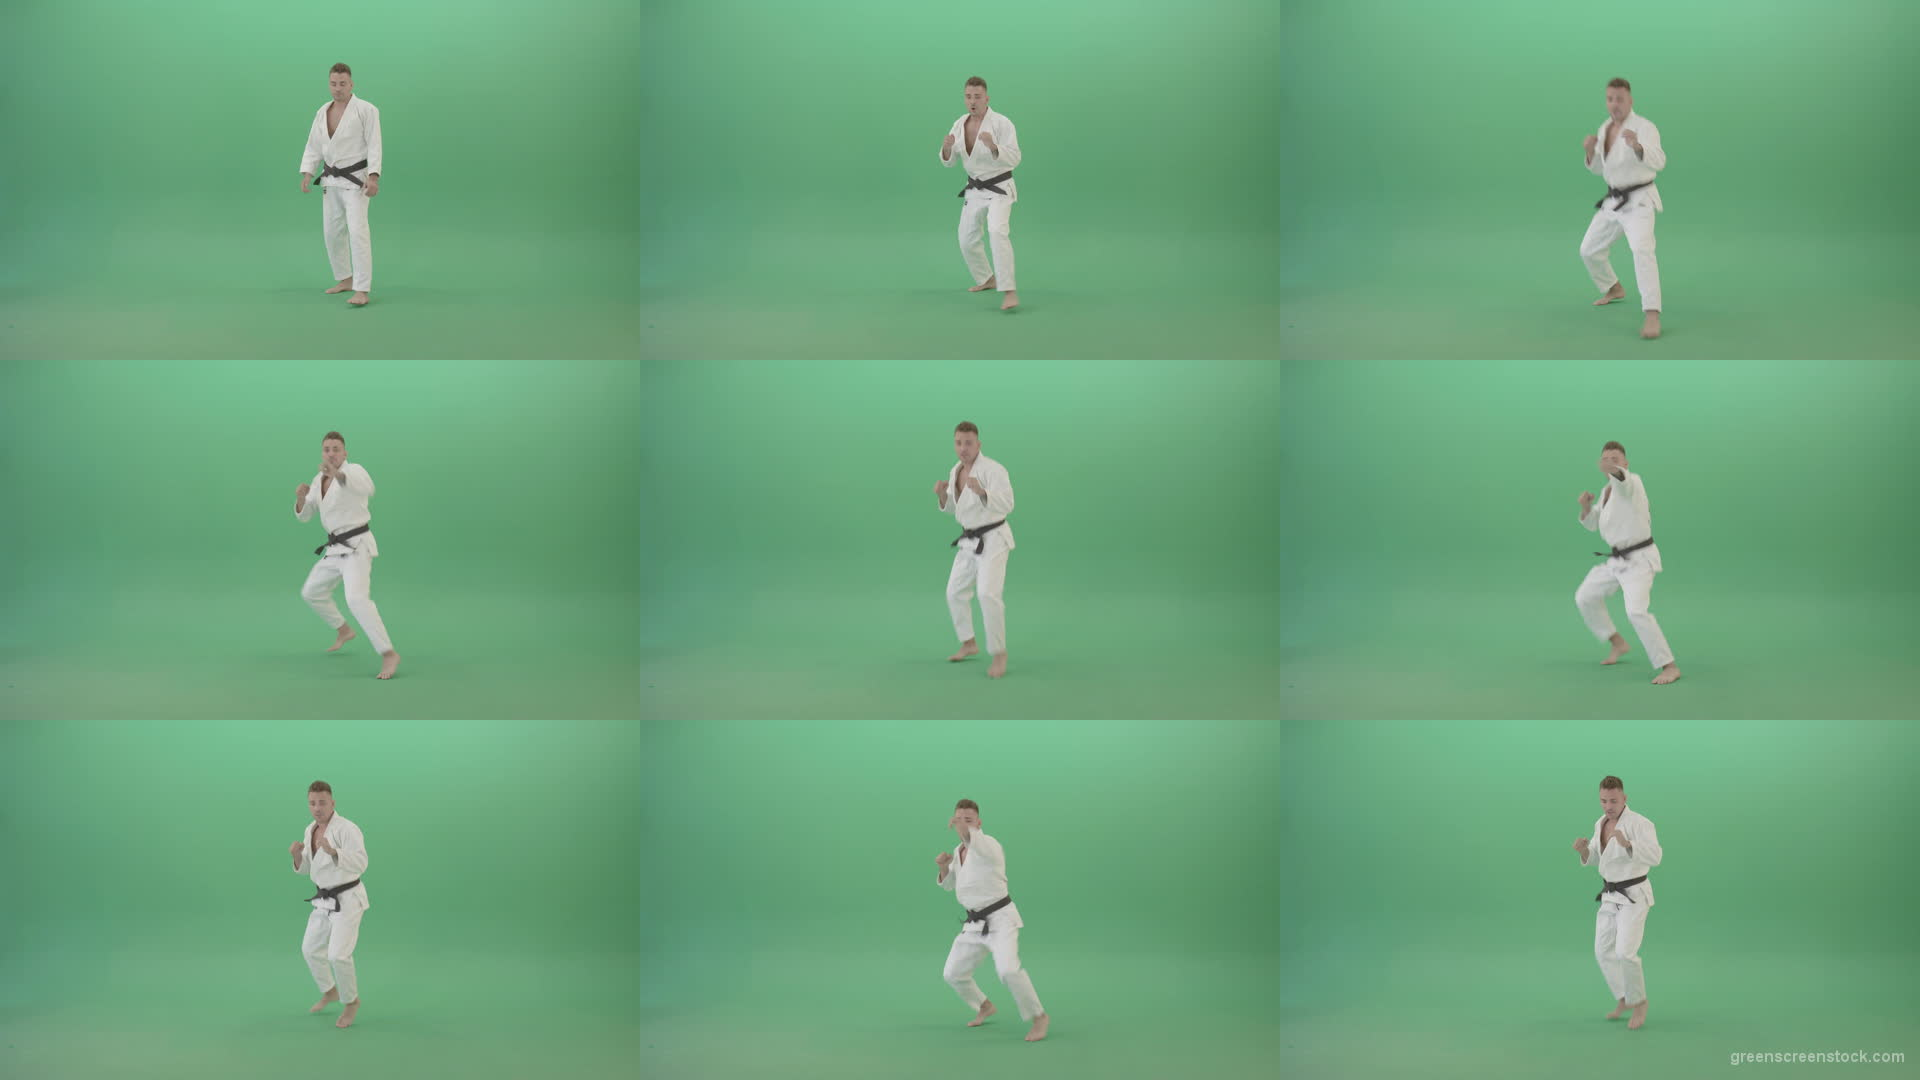 Karate-man-fight-front-vie-kick-punch-isolated-on-green-screen-4K-Video-Footage-1920 Green Screen Stock